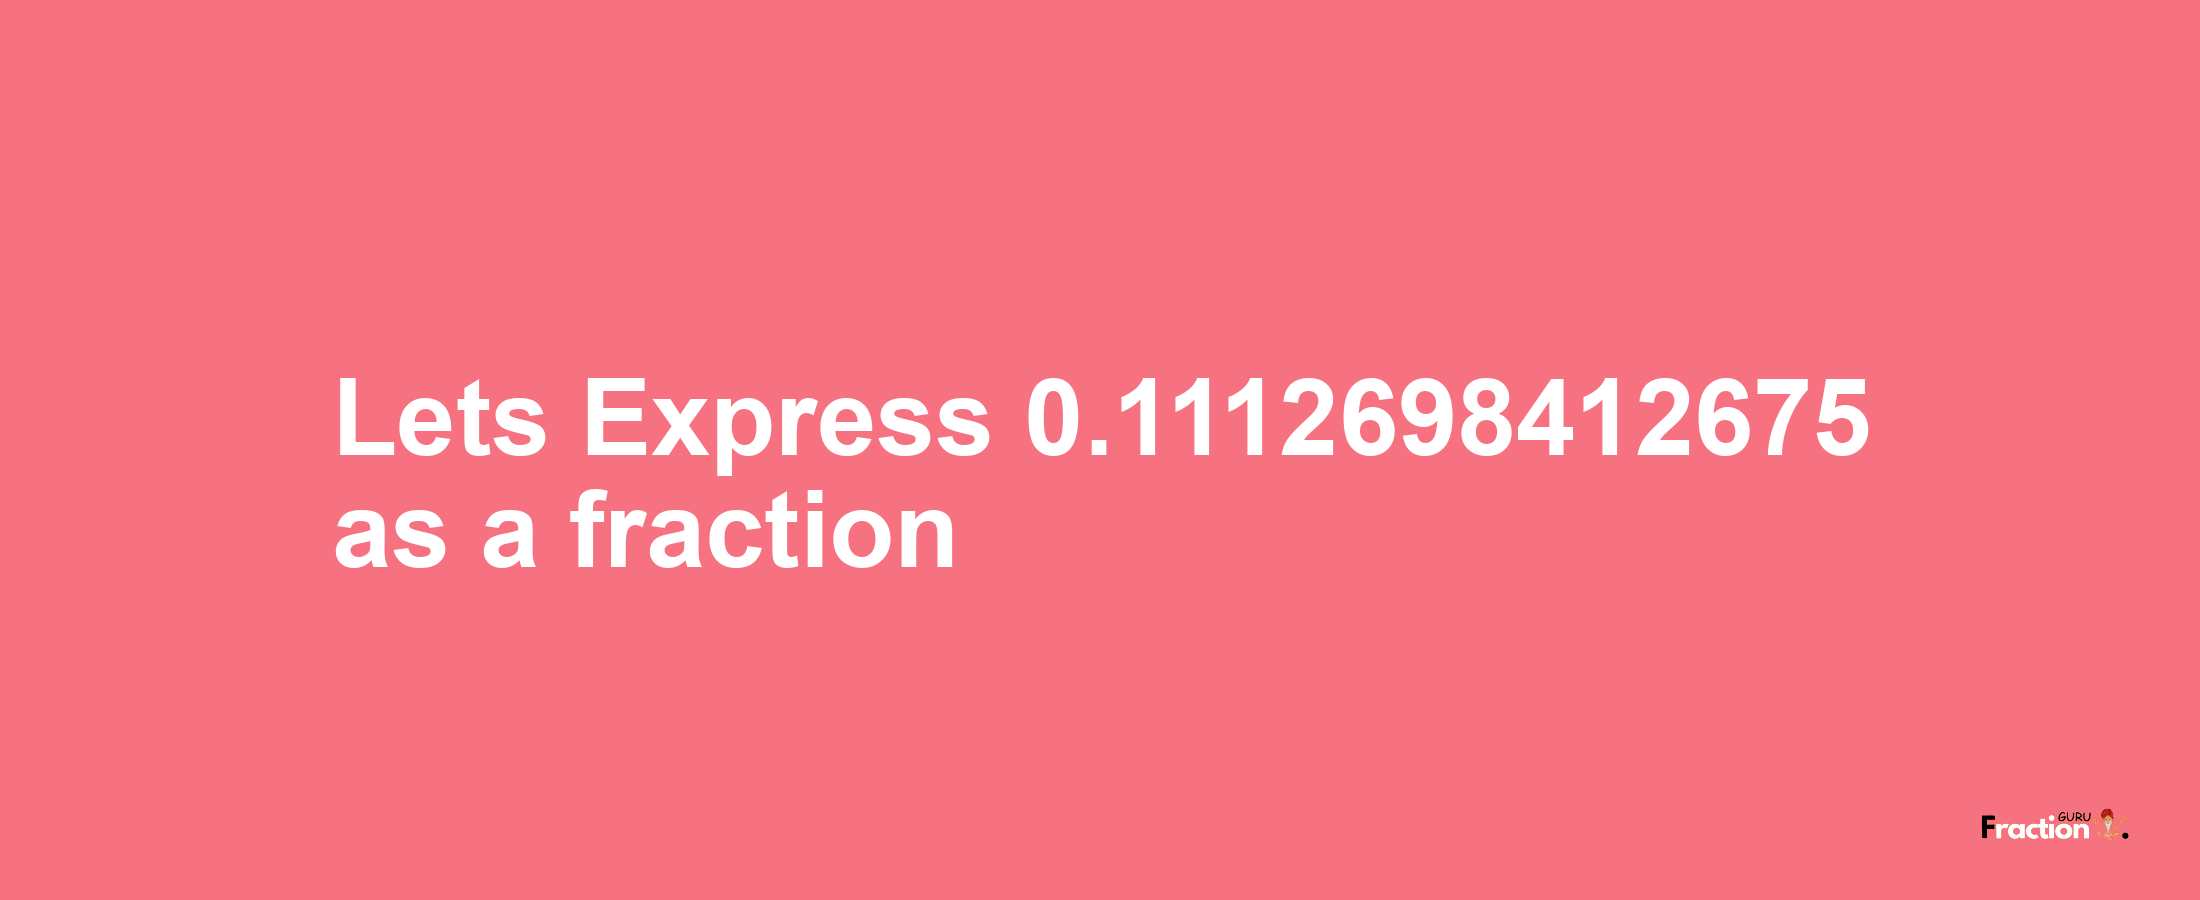 Lets Express 0.1112698412675 as afraction